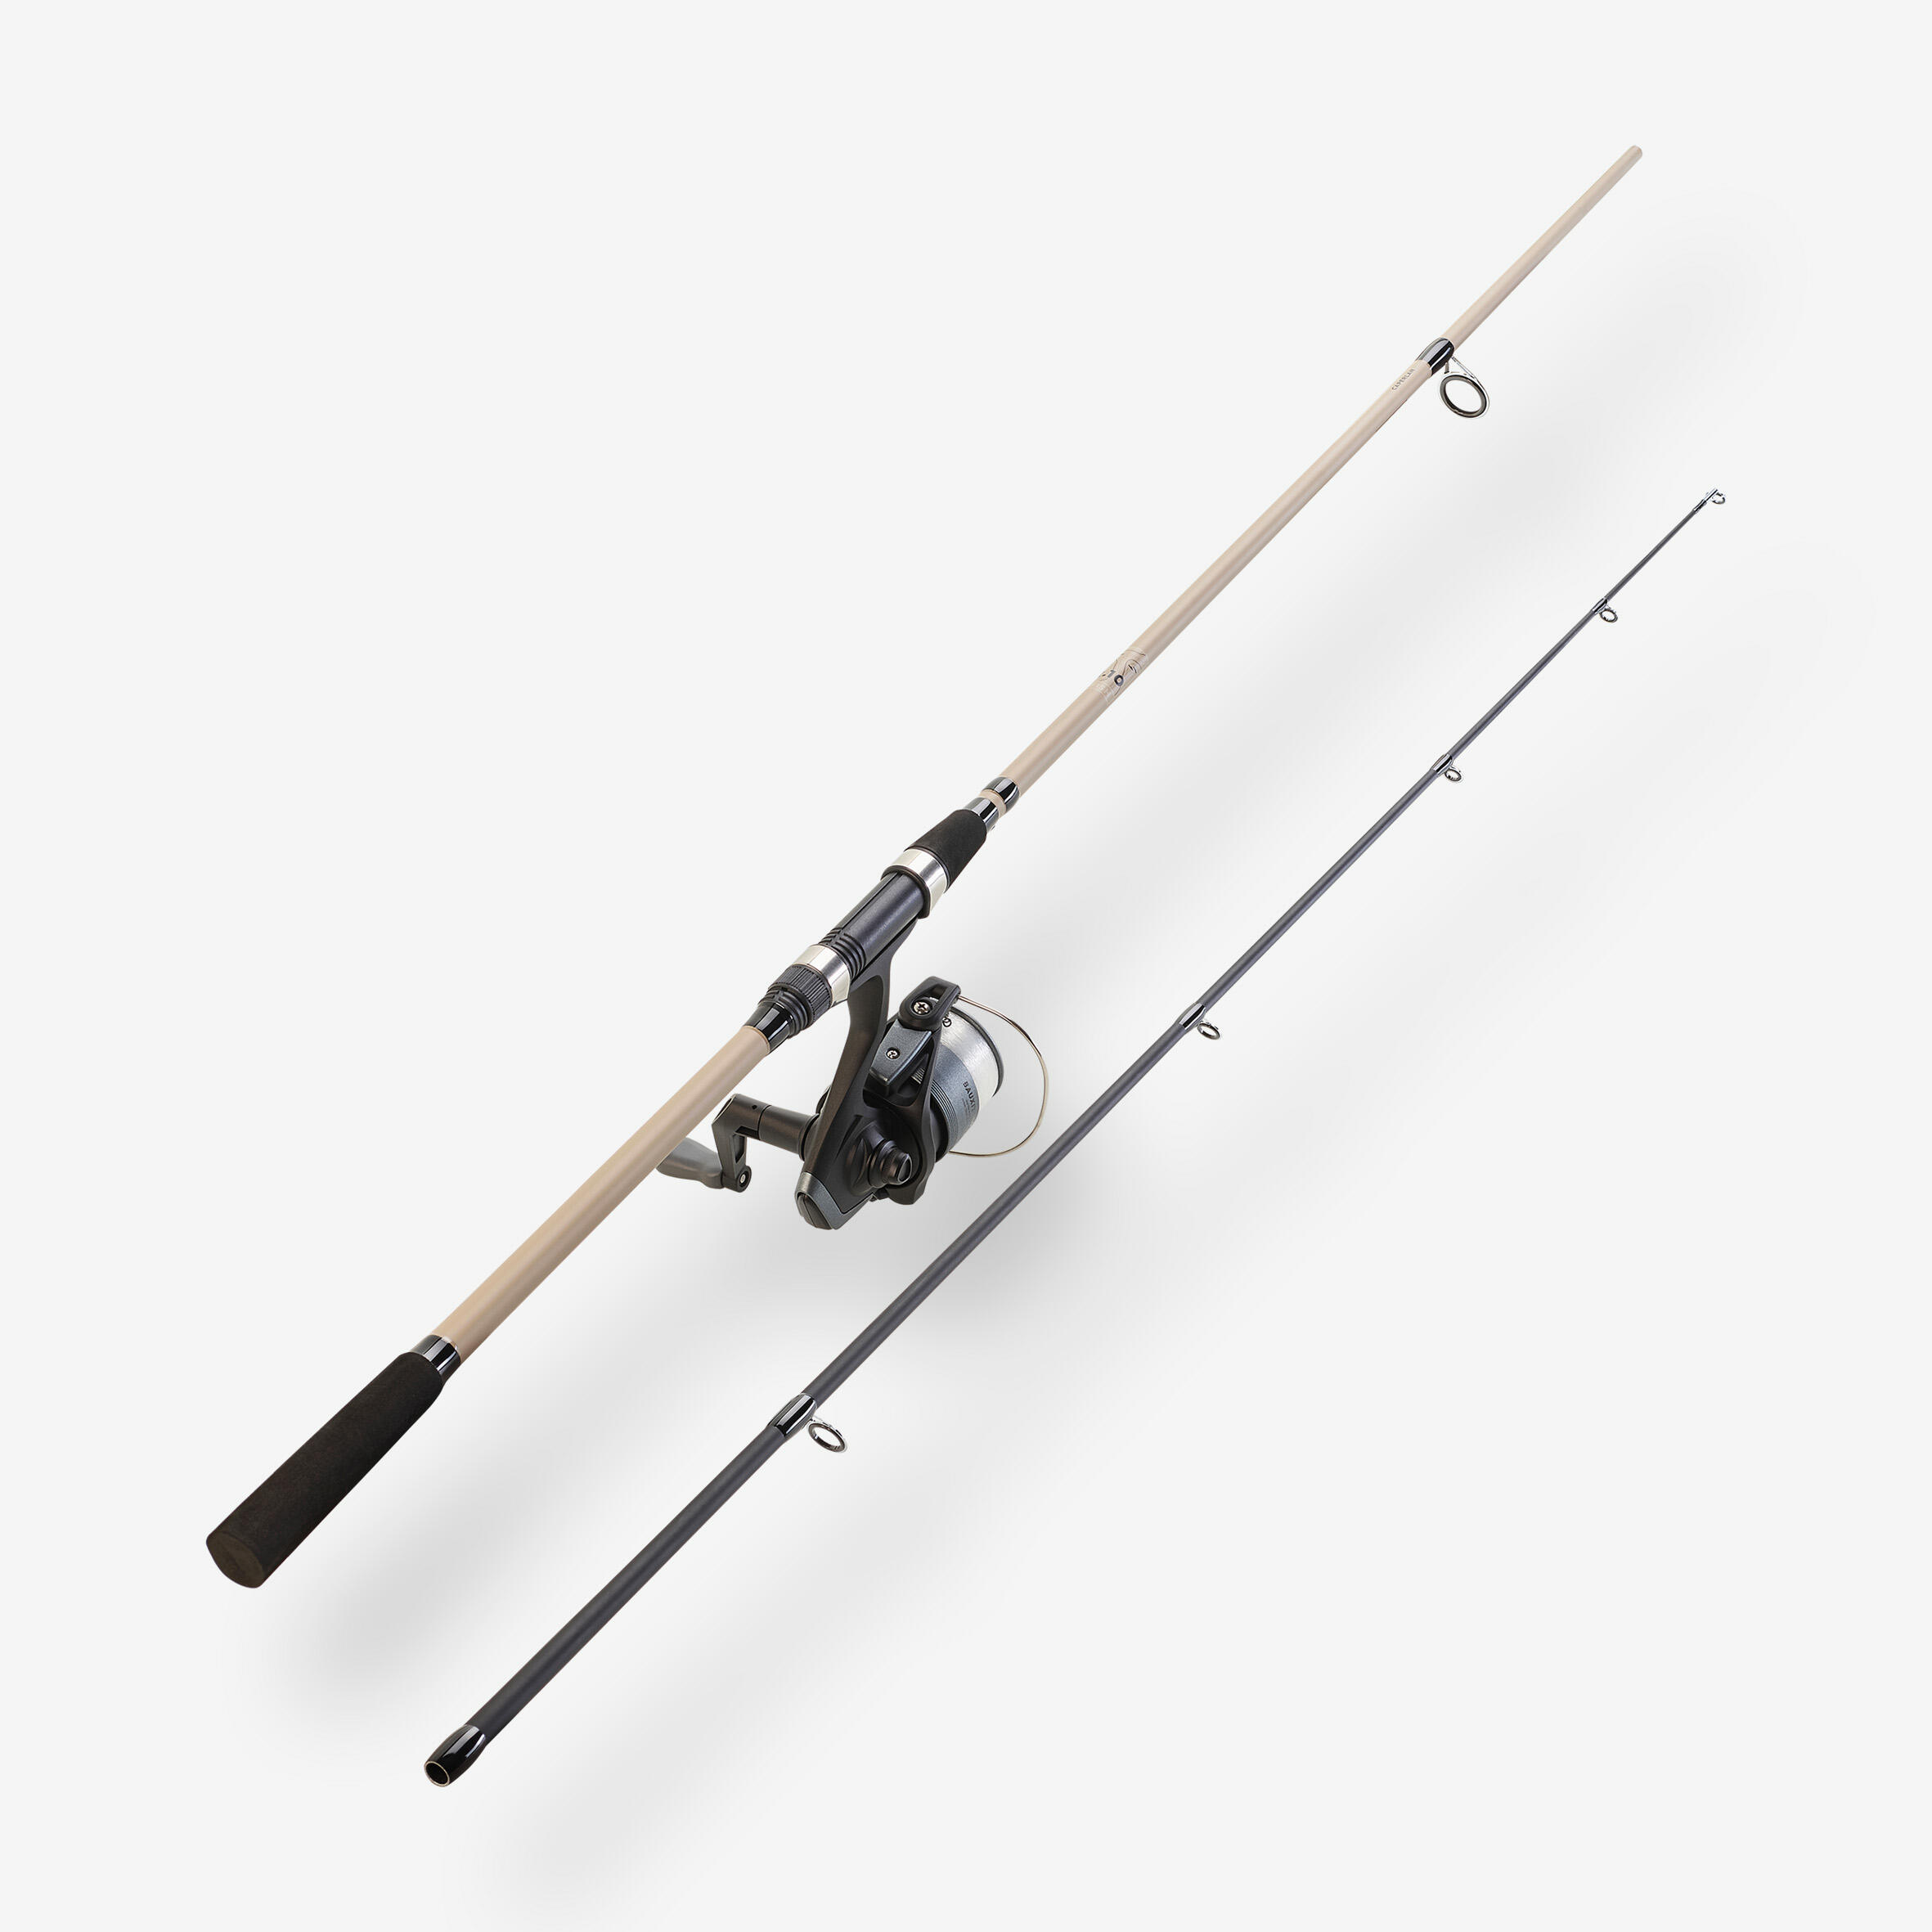 Trout fishing Rods, sets